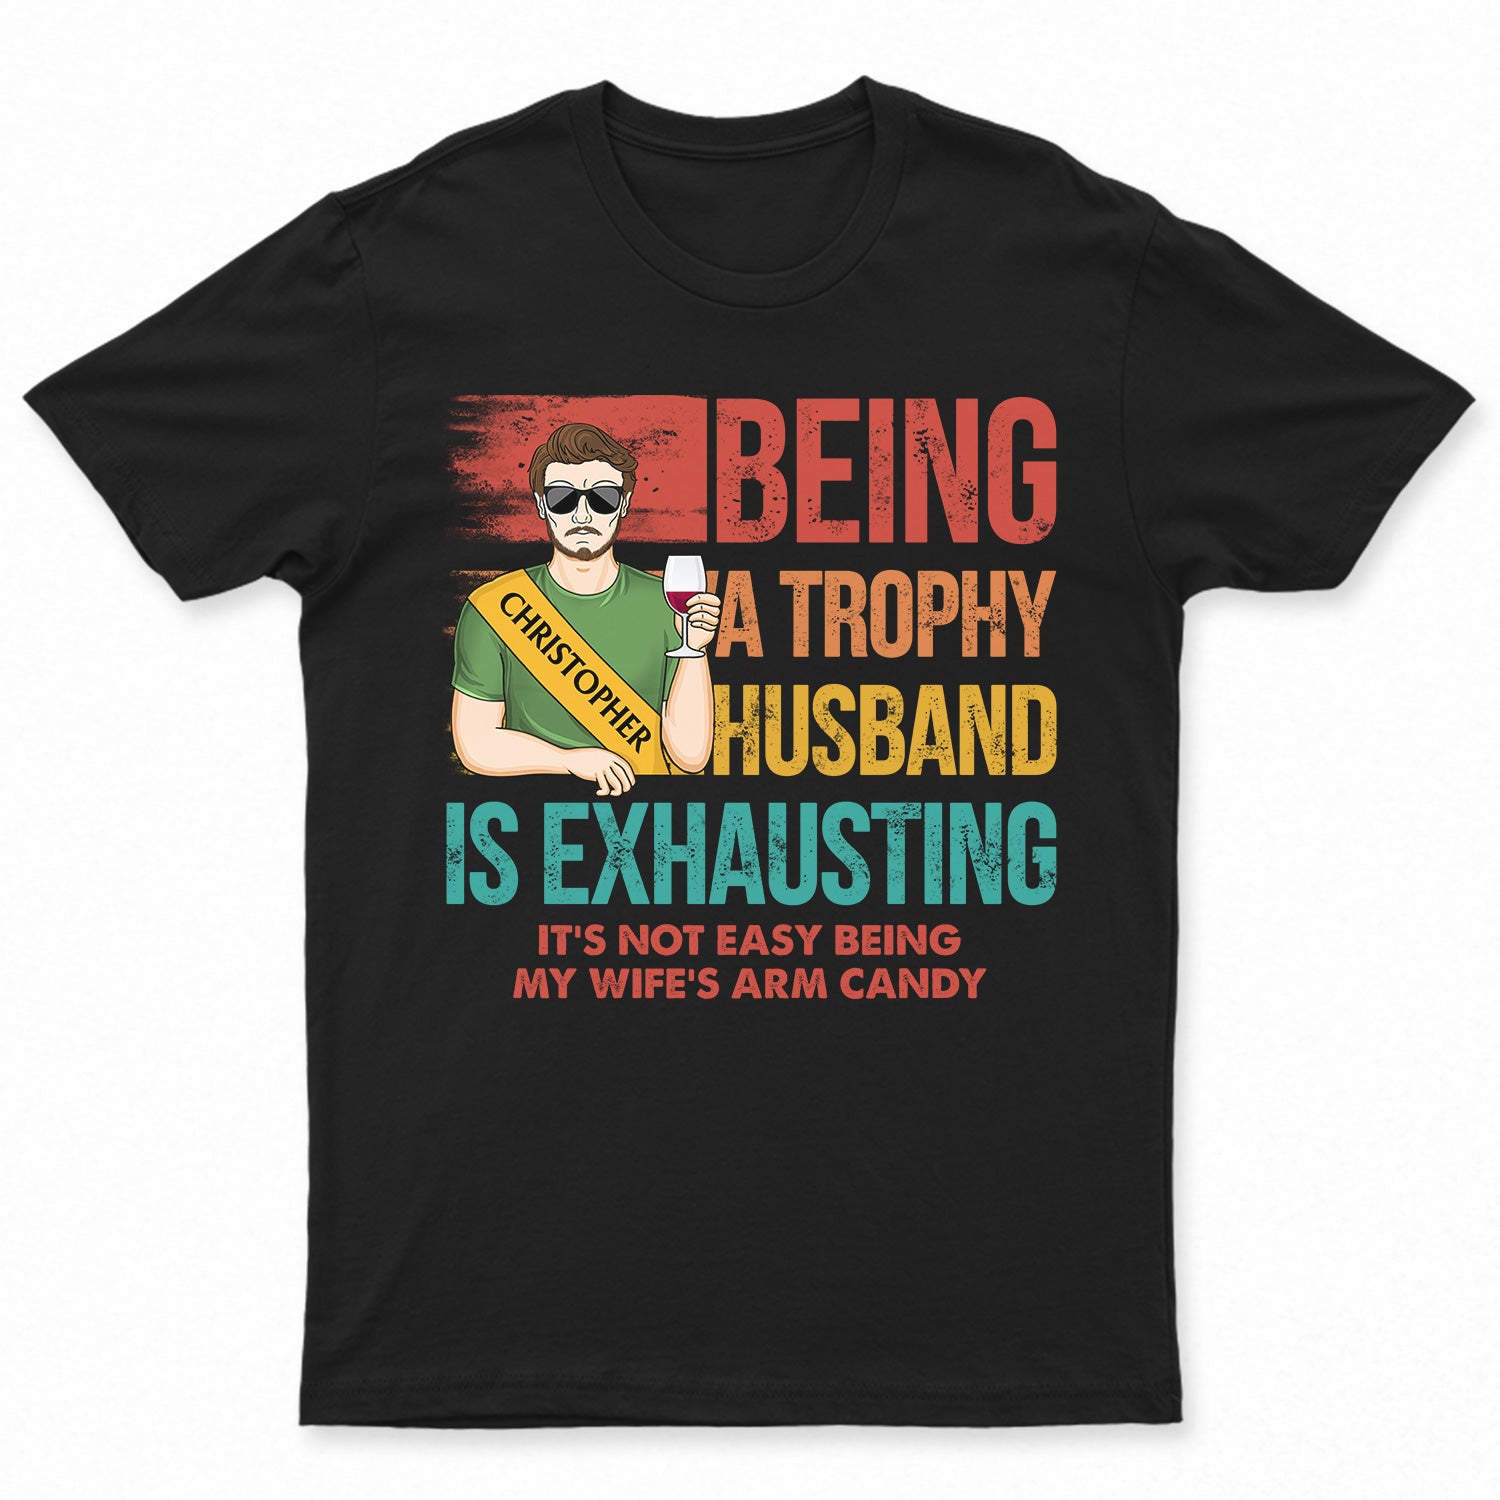 Being A Trophy Husband Is Exhausting Married Man - Funny, Anniversary, Birthday Gifts For Husband - Personalized Custom T Shirt